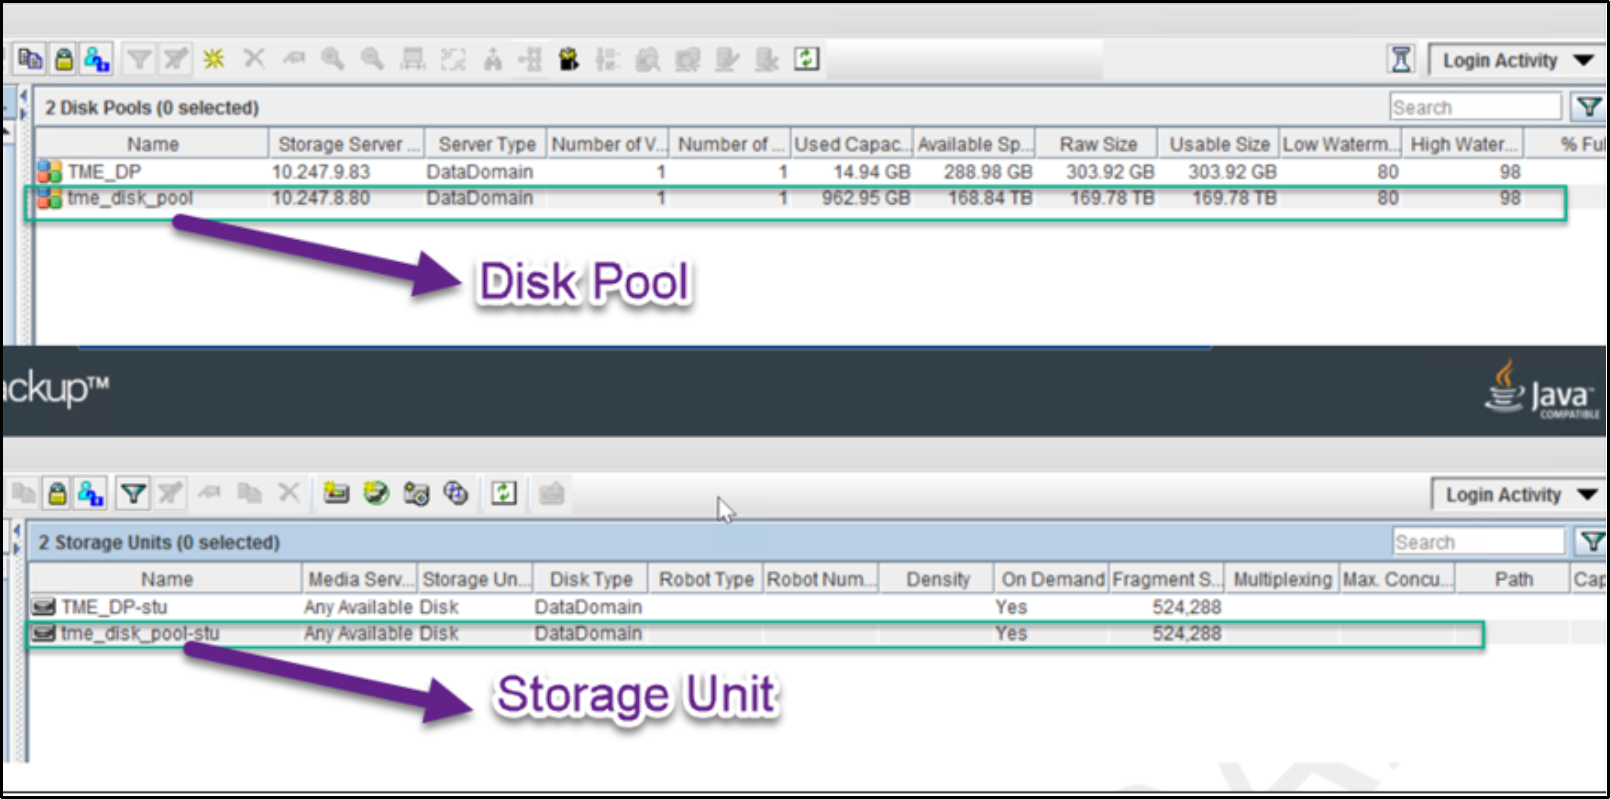 This image shows the successful disk pool and storage unit creation.